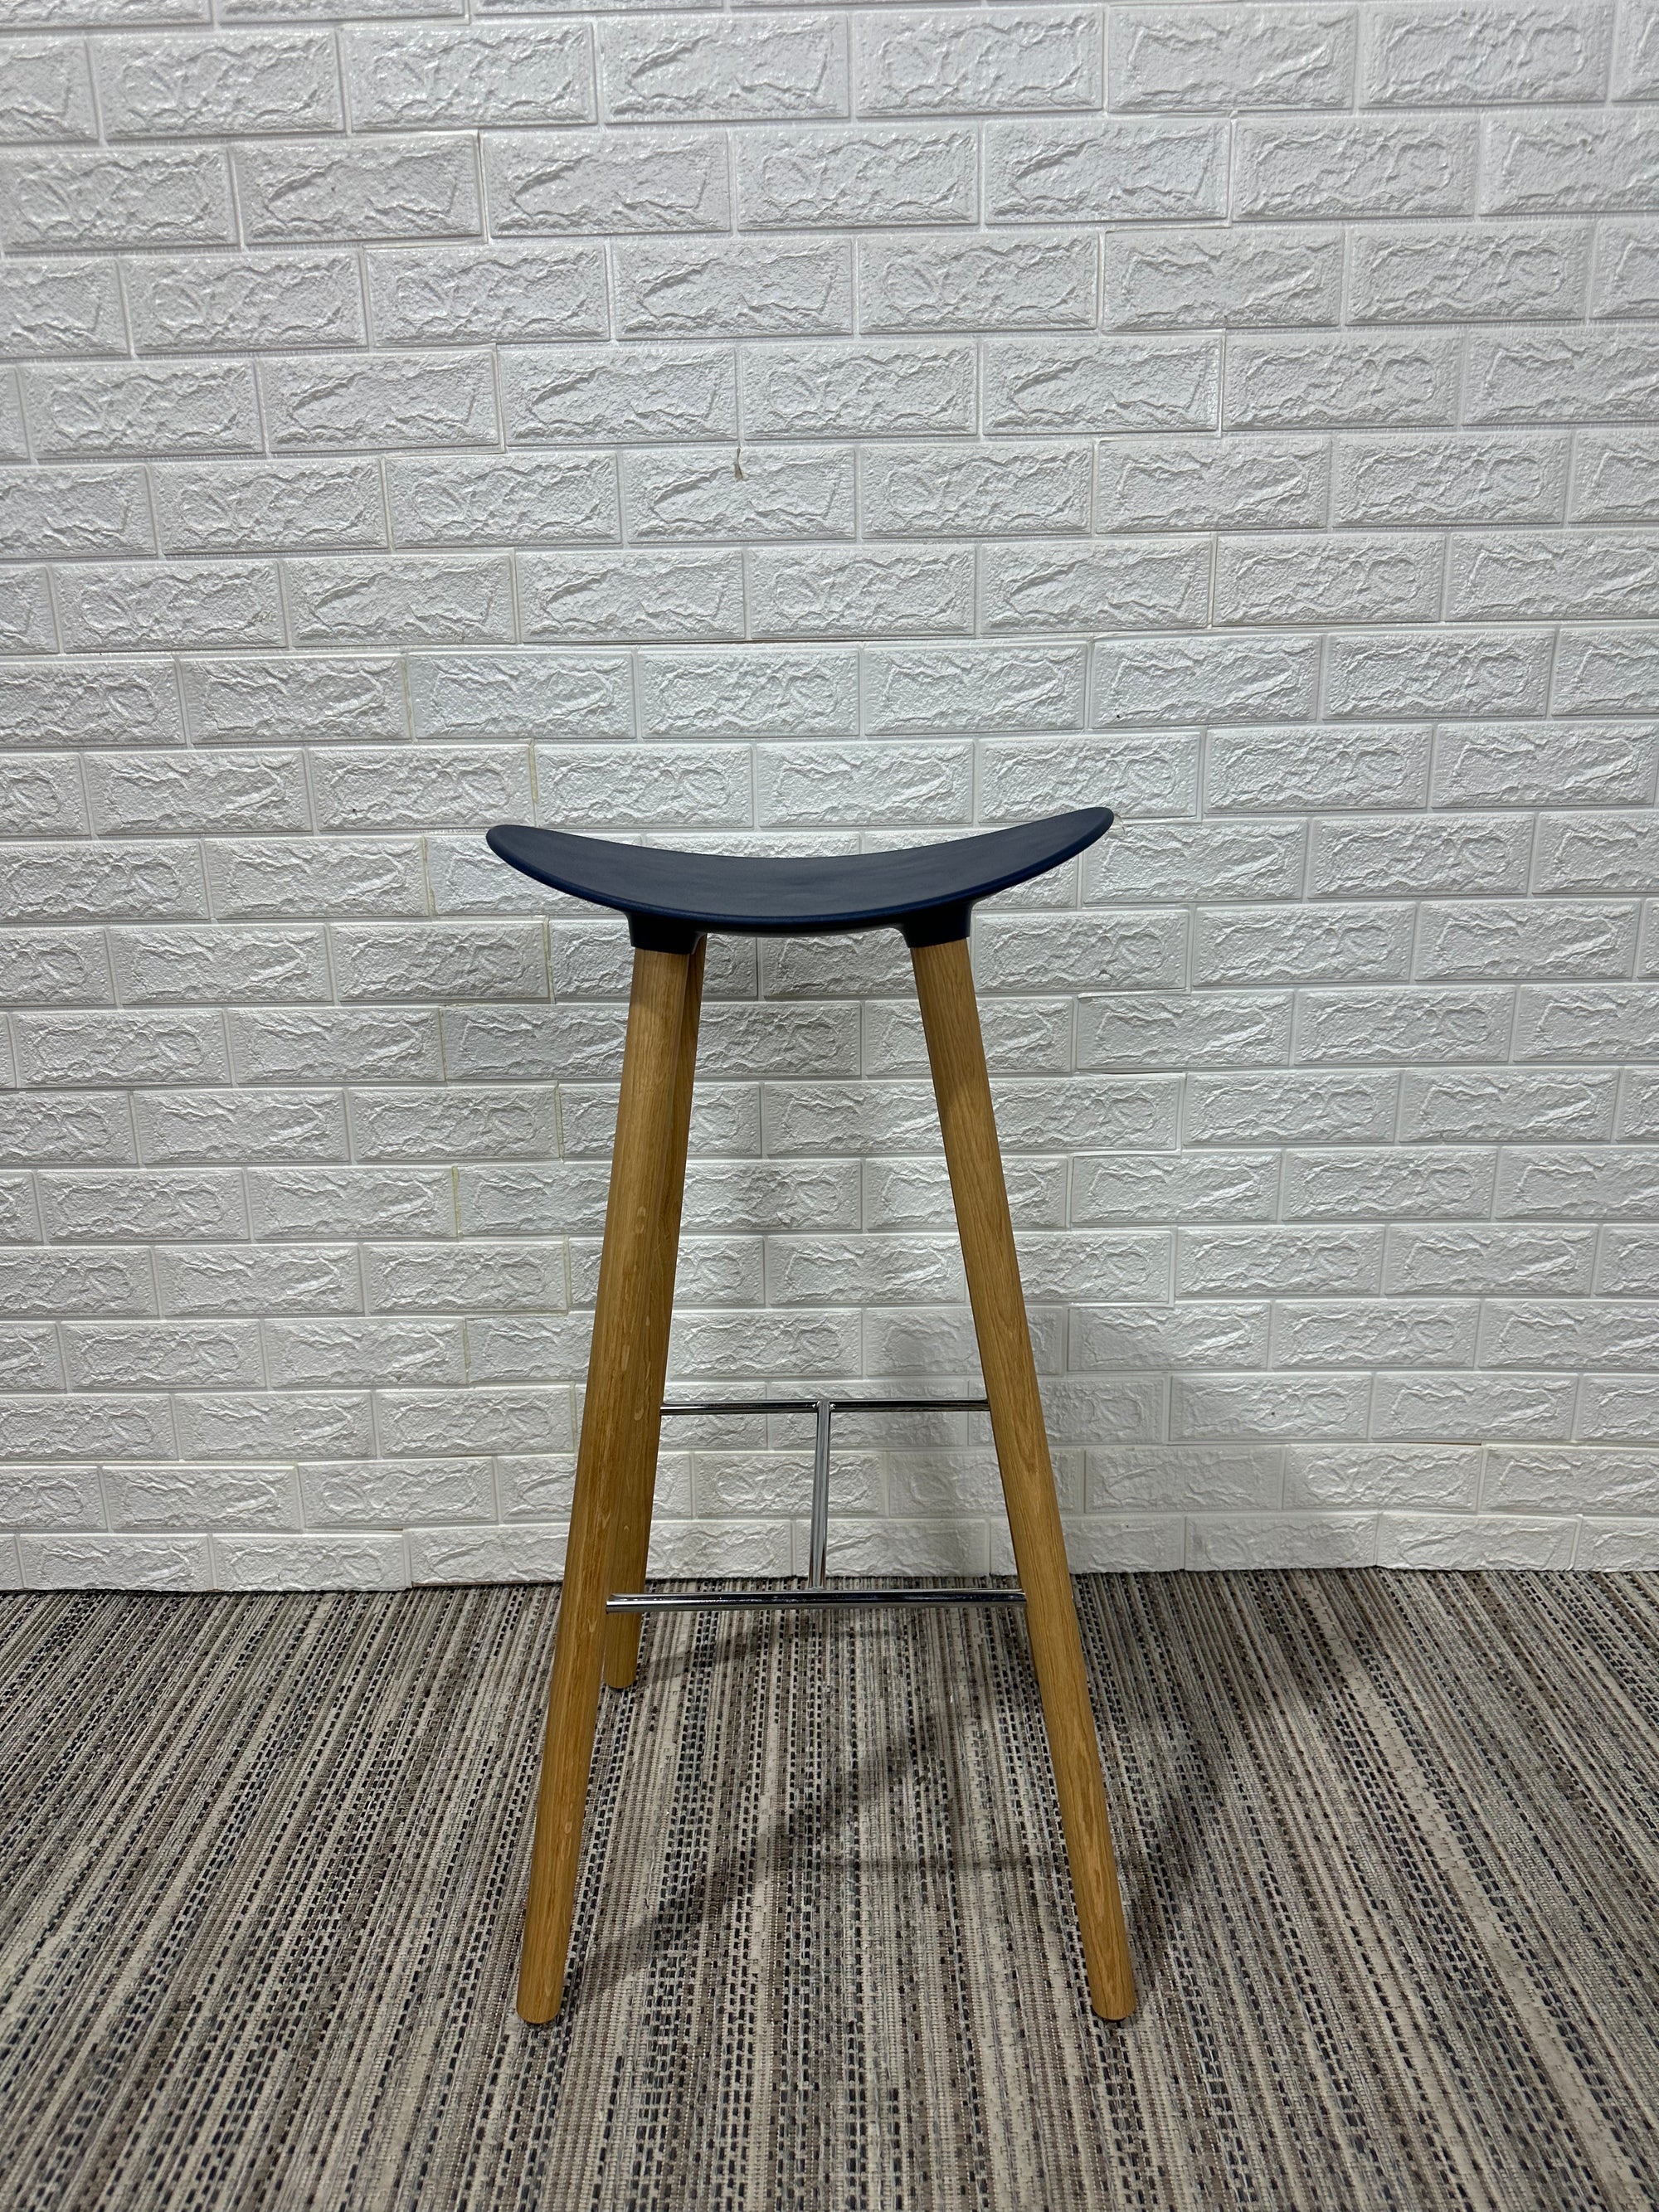 Pre-Owned Blue Stool - Duckys Office Furniture